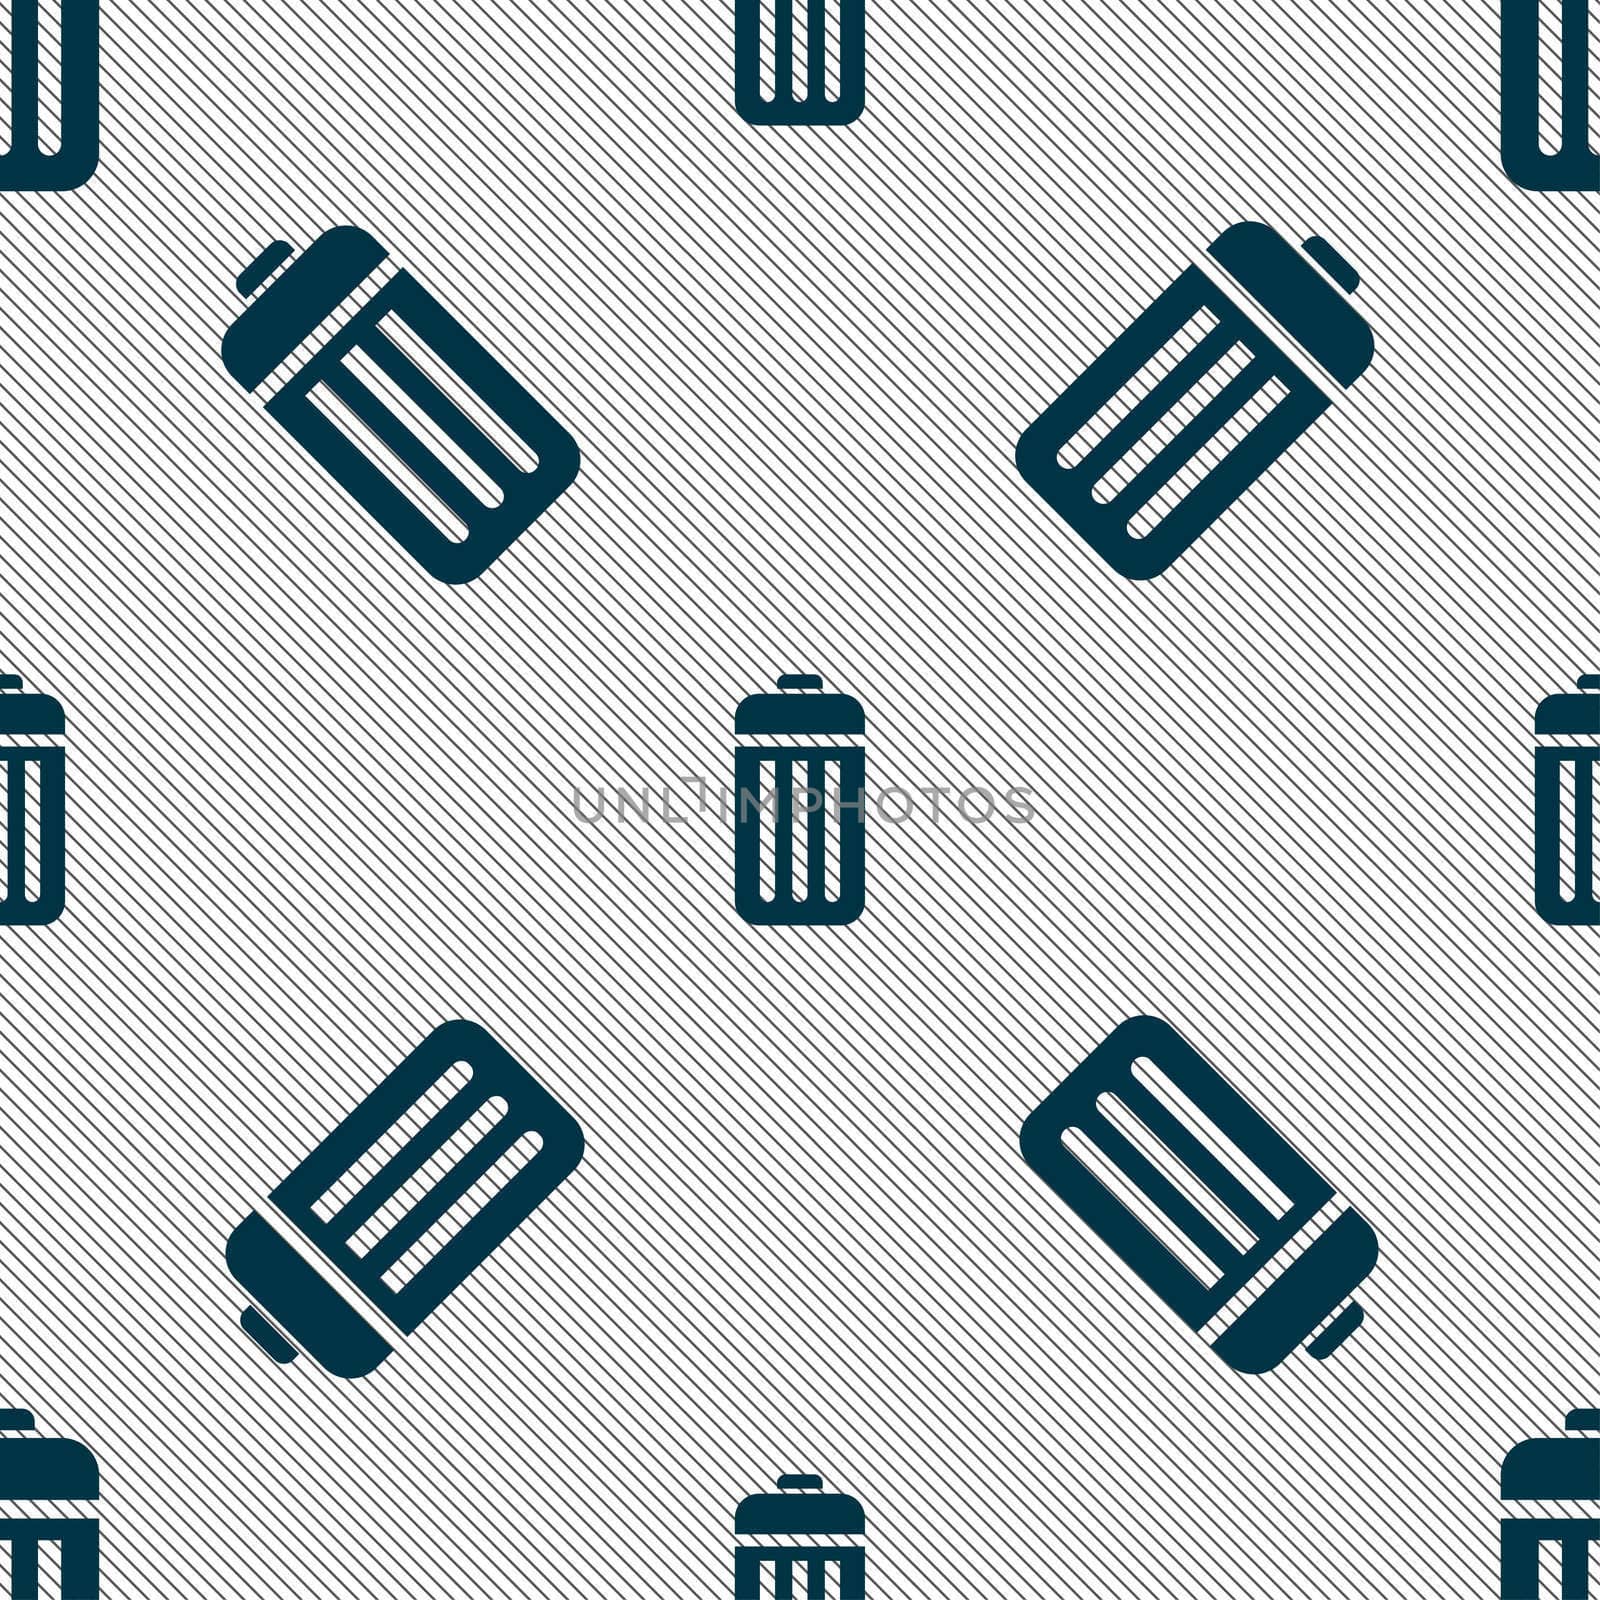 The trash icon sign. Seamless pattern with geometric texture. illustration